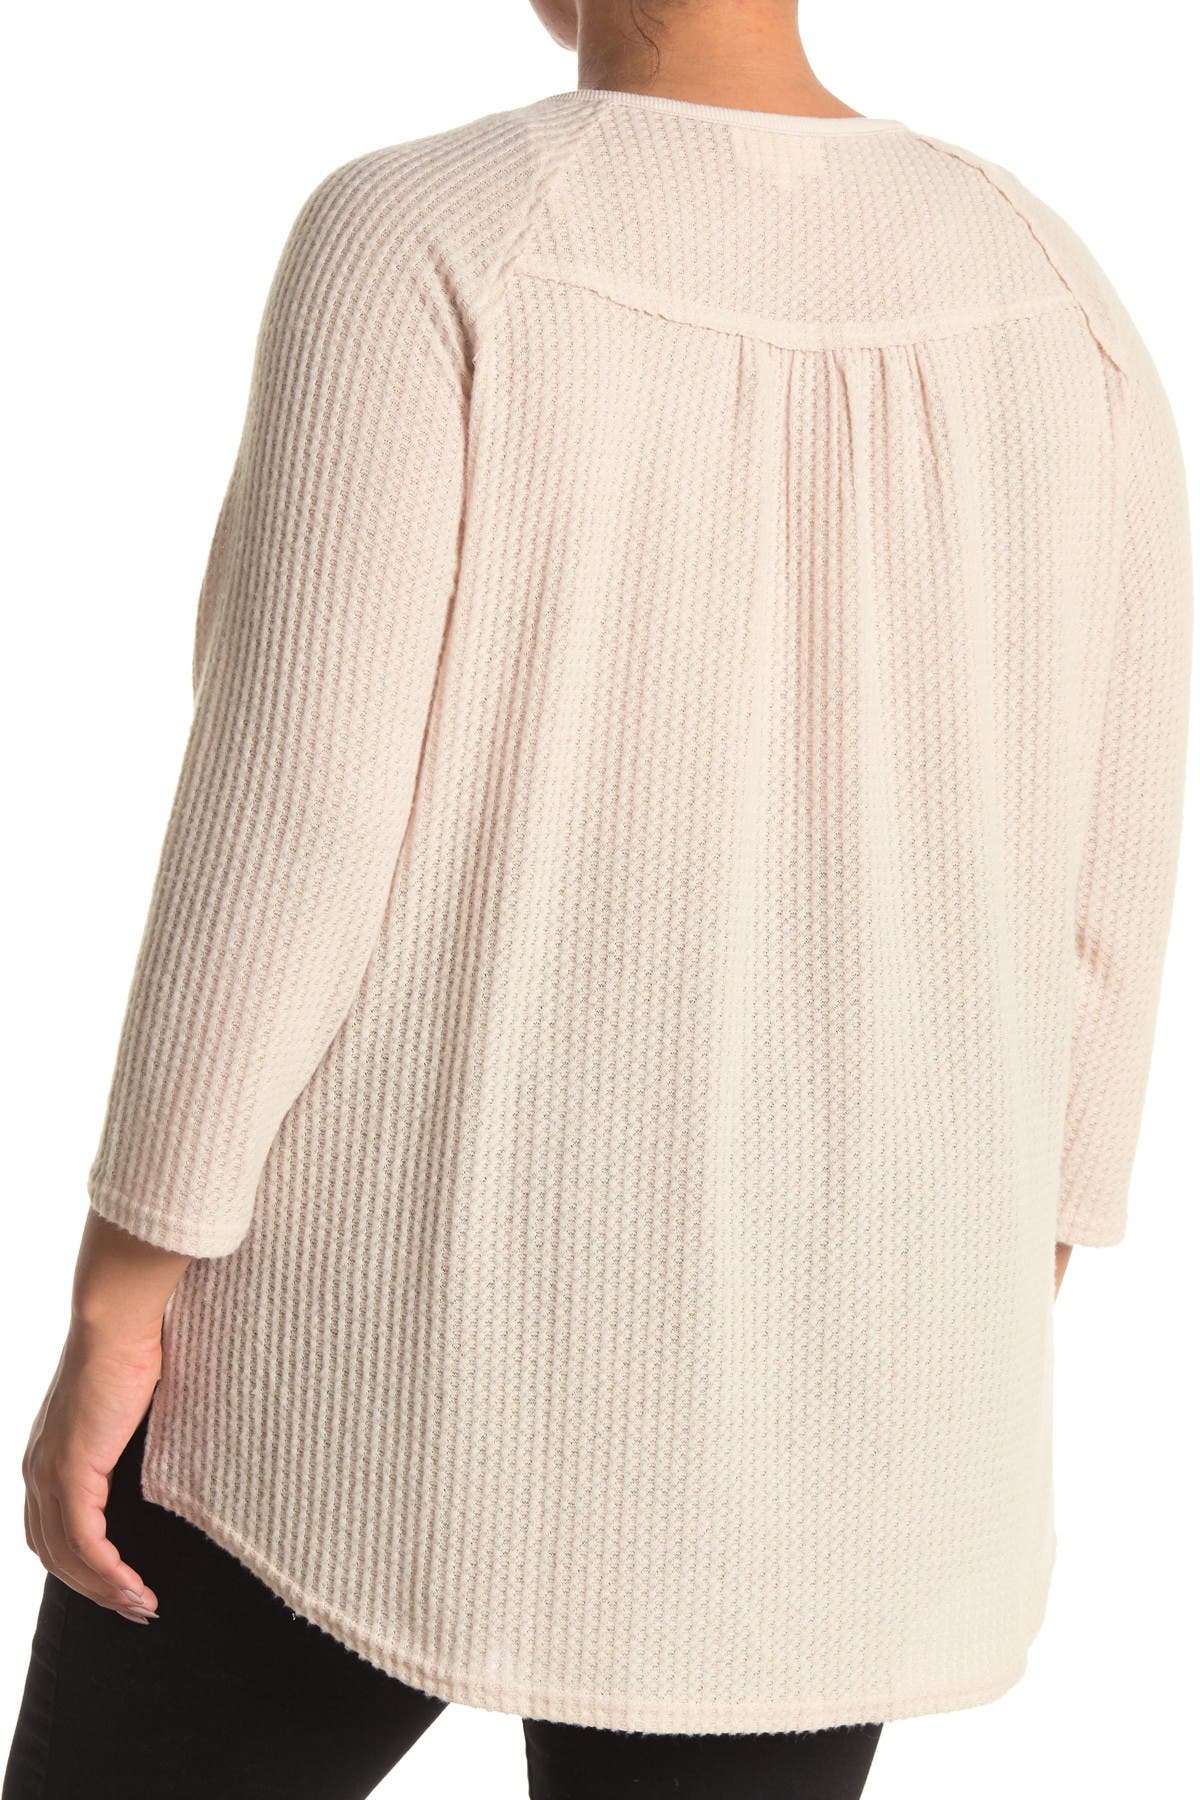 Melloday Brushed Waffle Knit Henley Top In Open White38